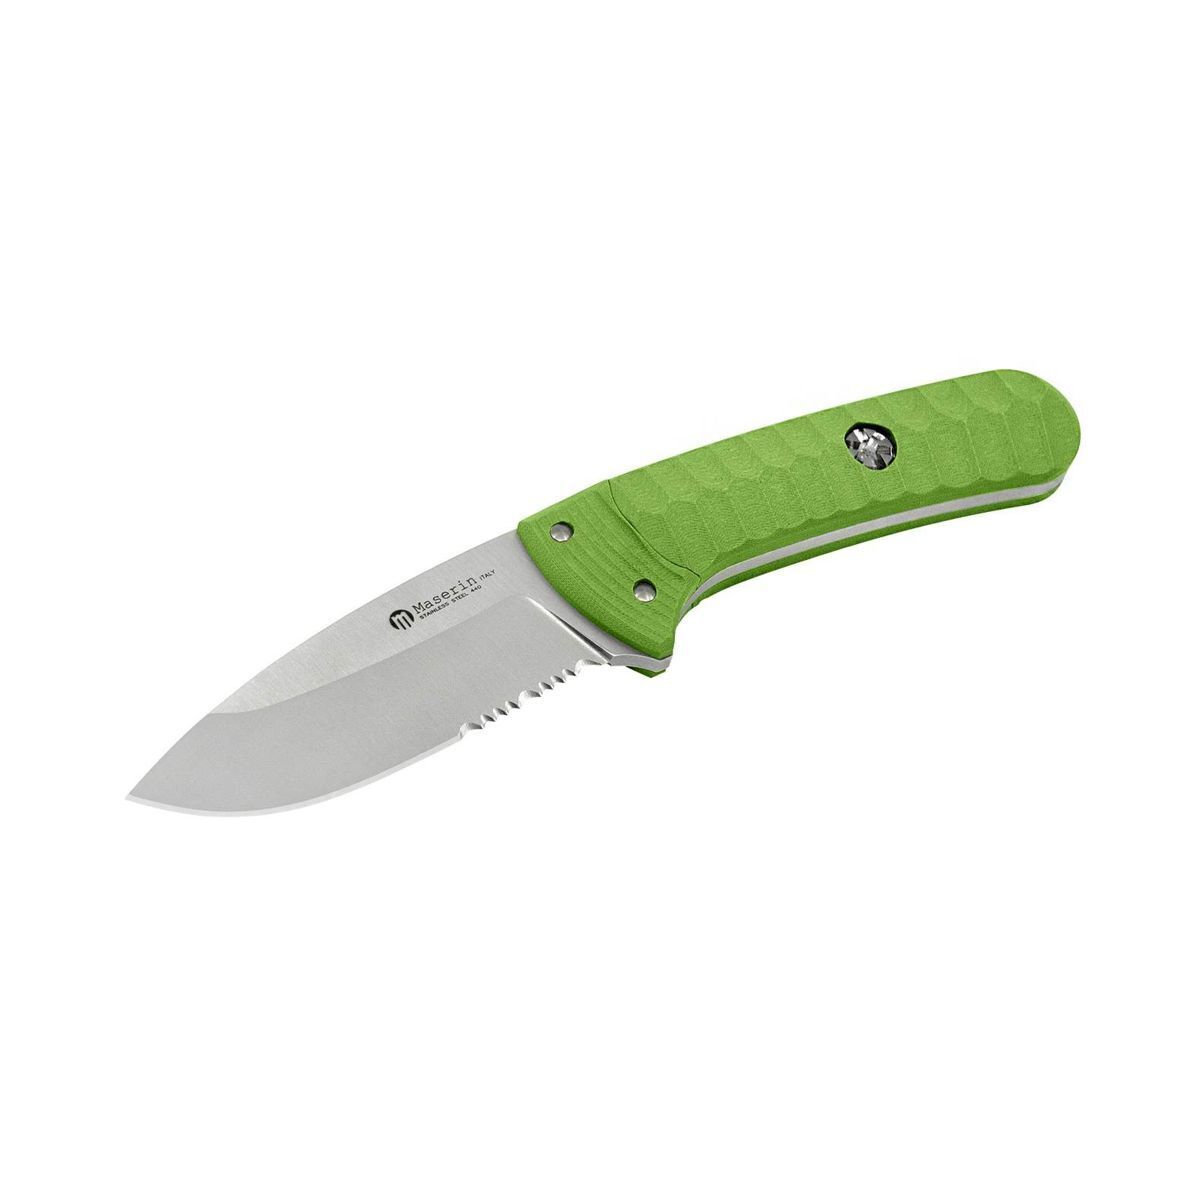 Maserin 975/G10V 85mm Sax Bush Craft Knife (Green Handle) -  - Mansfield Hunting & Fishing - Products to prepare for Corona Virus